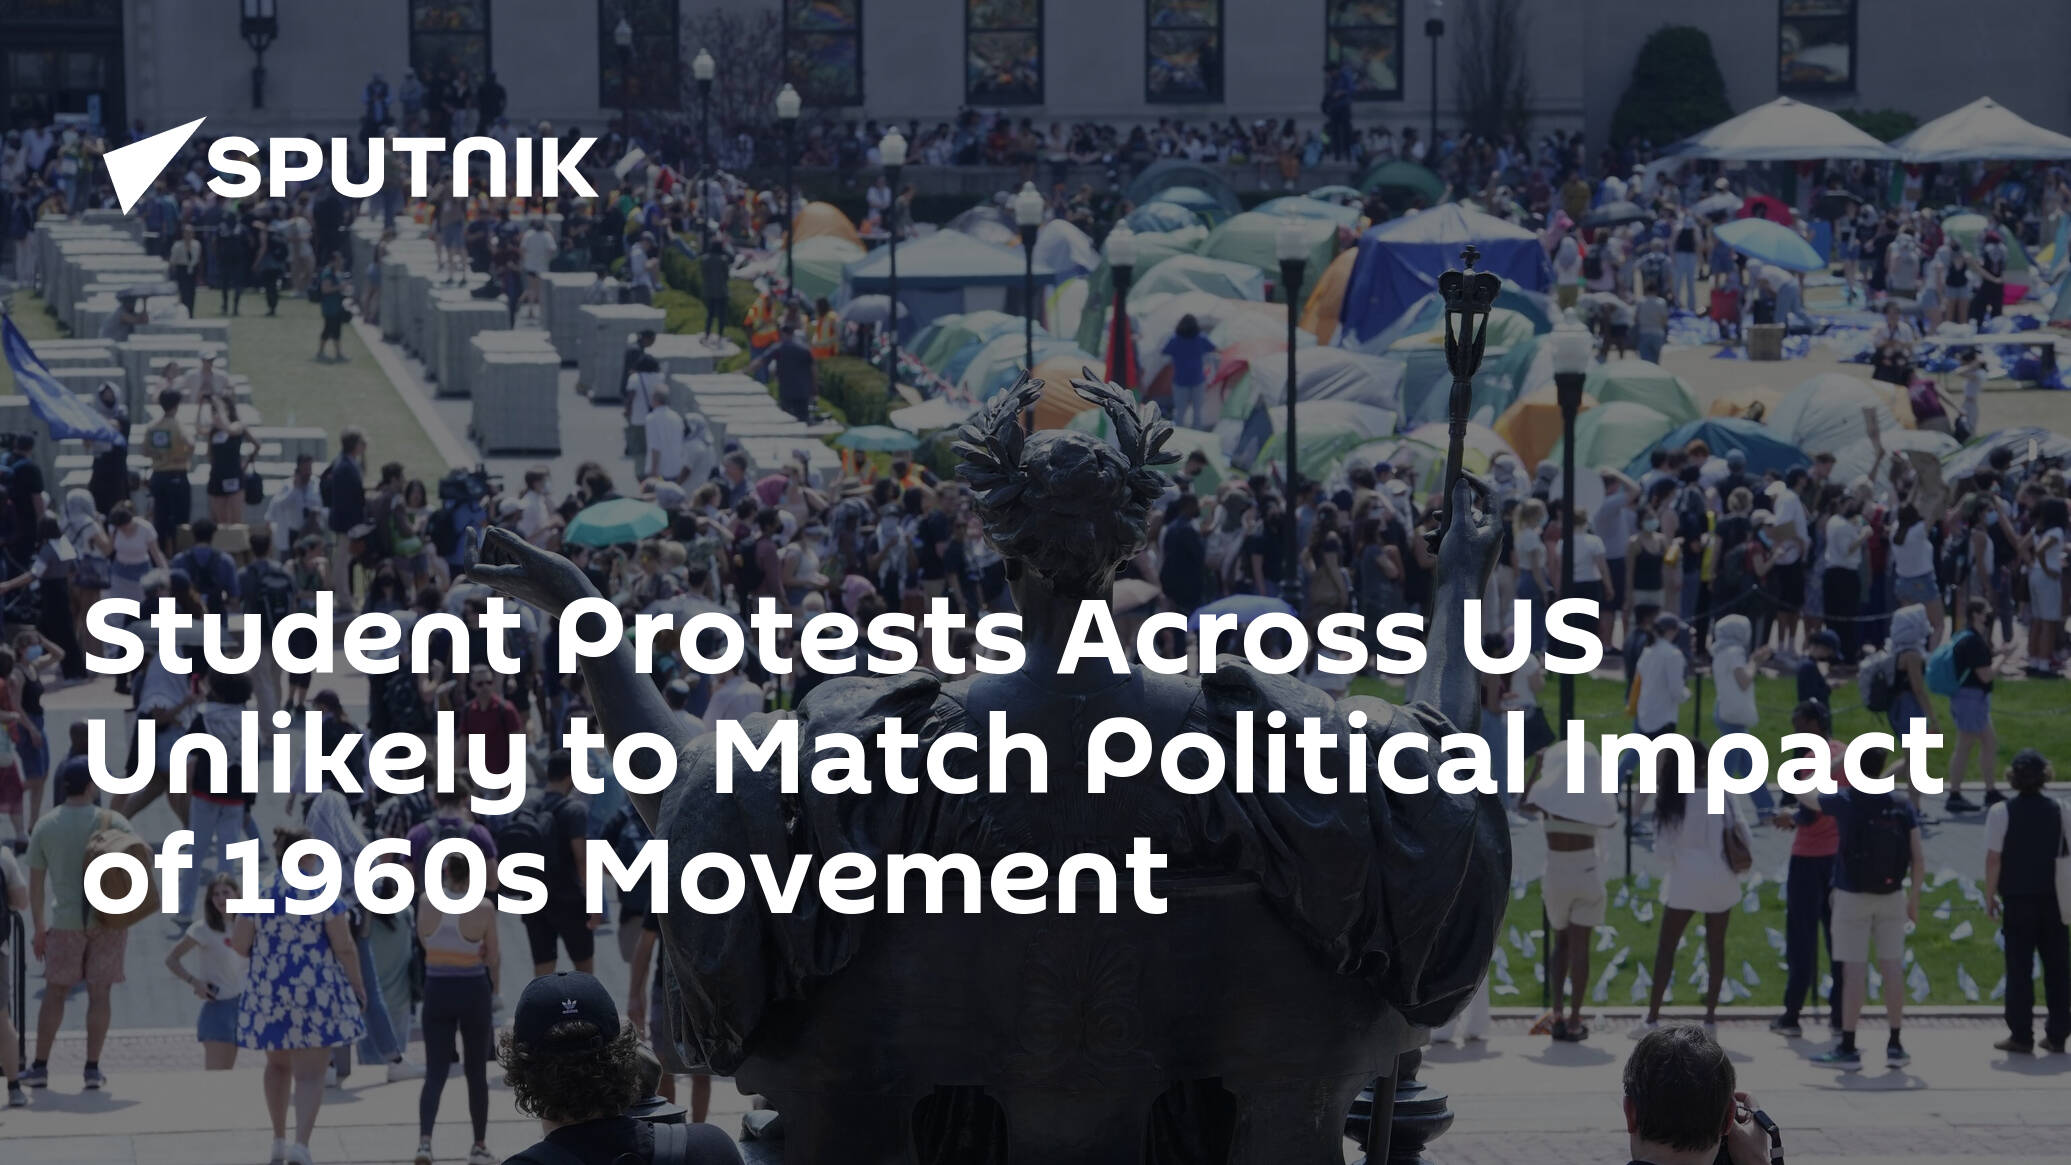 Student Protests Across US Unlikely to Match Political Impact of 1960s Movement